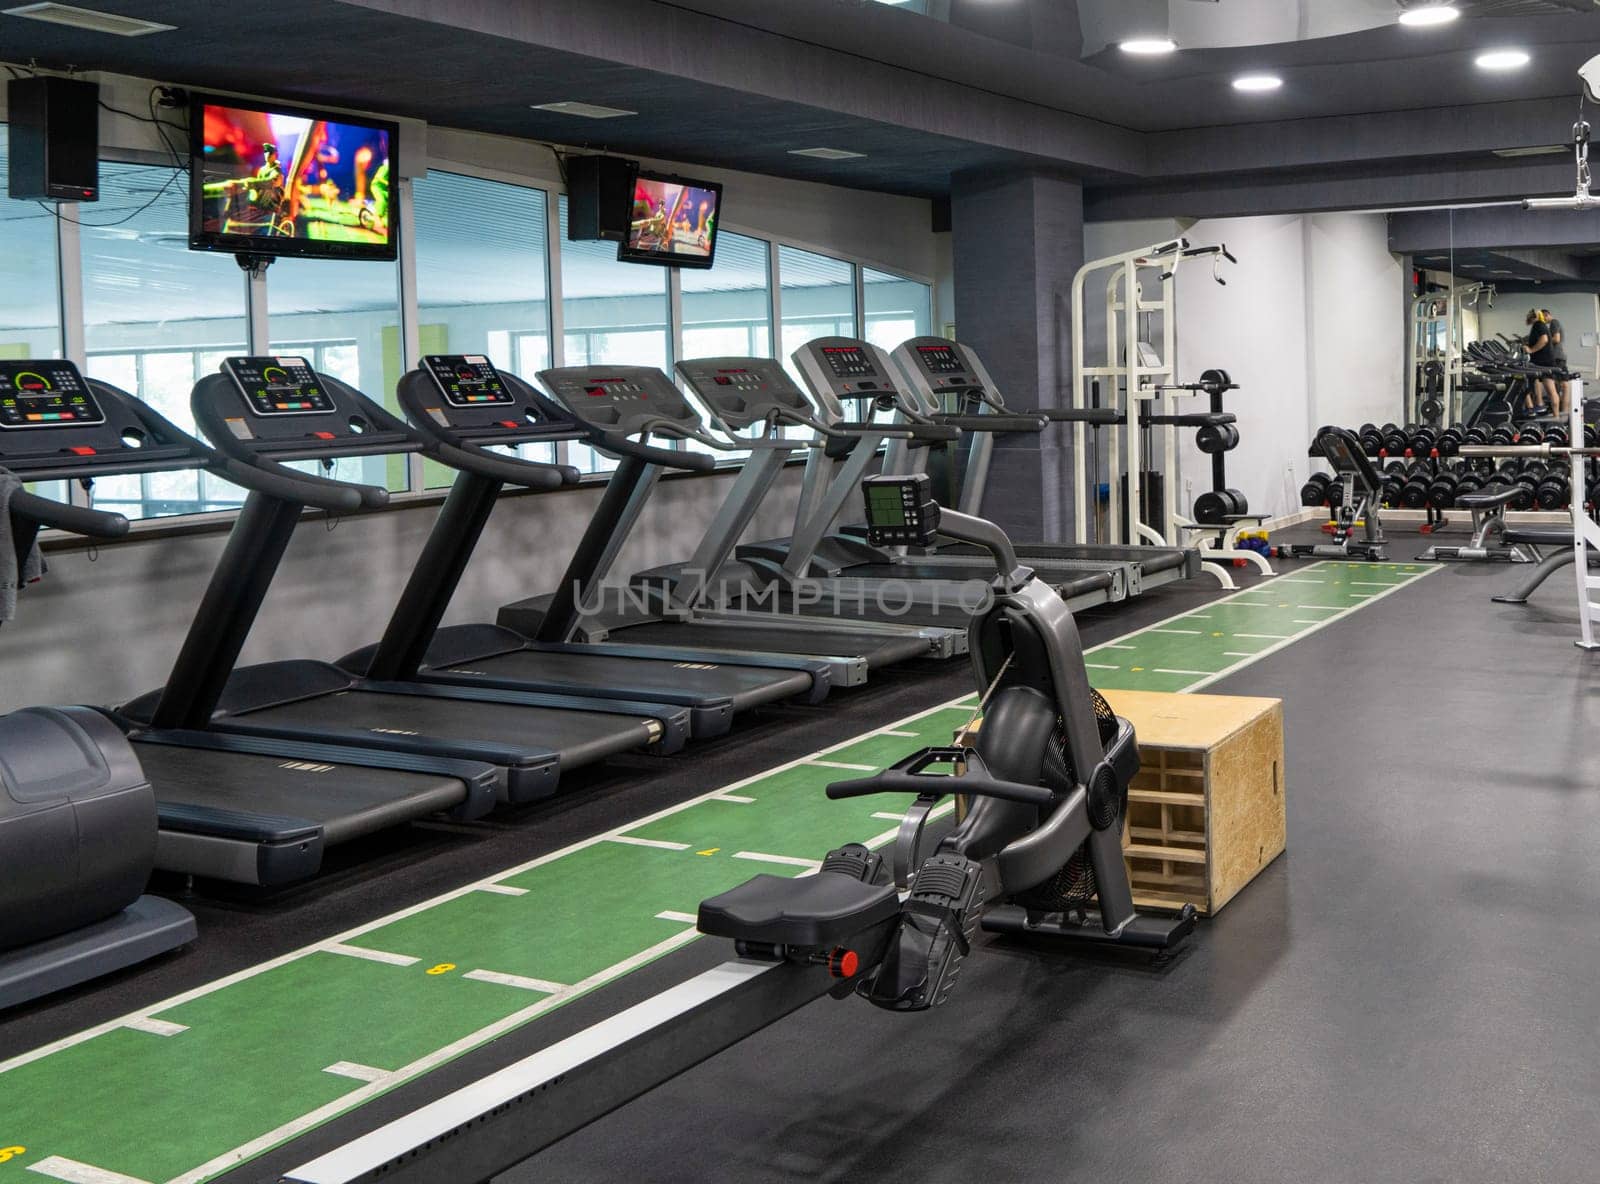 The row of treadmills in the sports complex